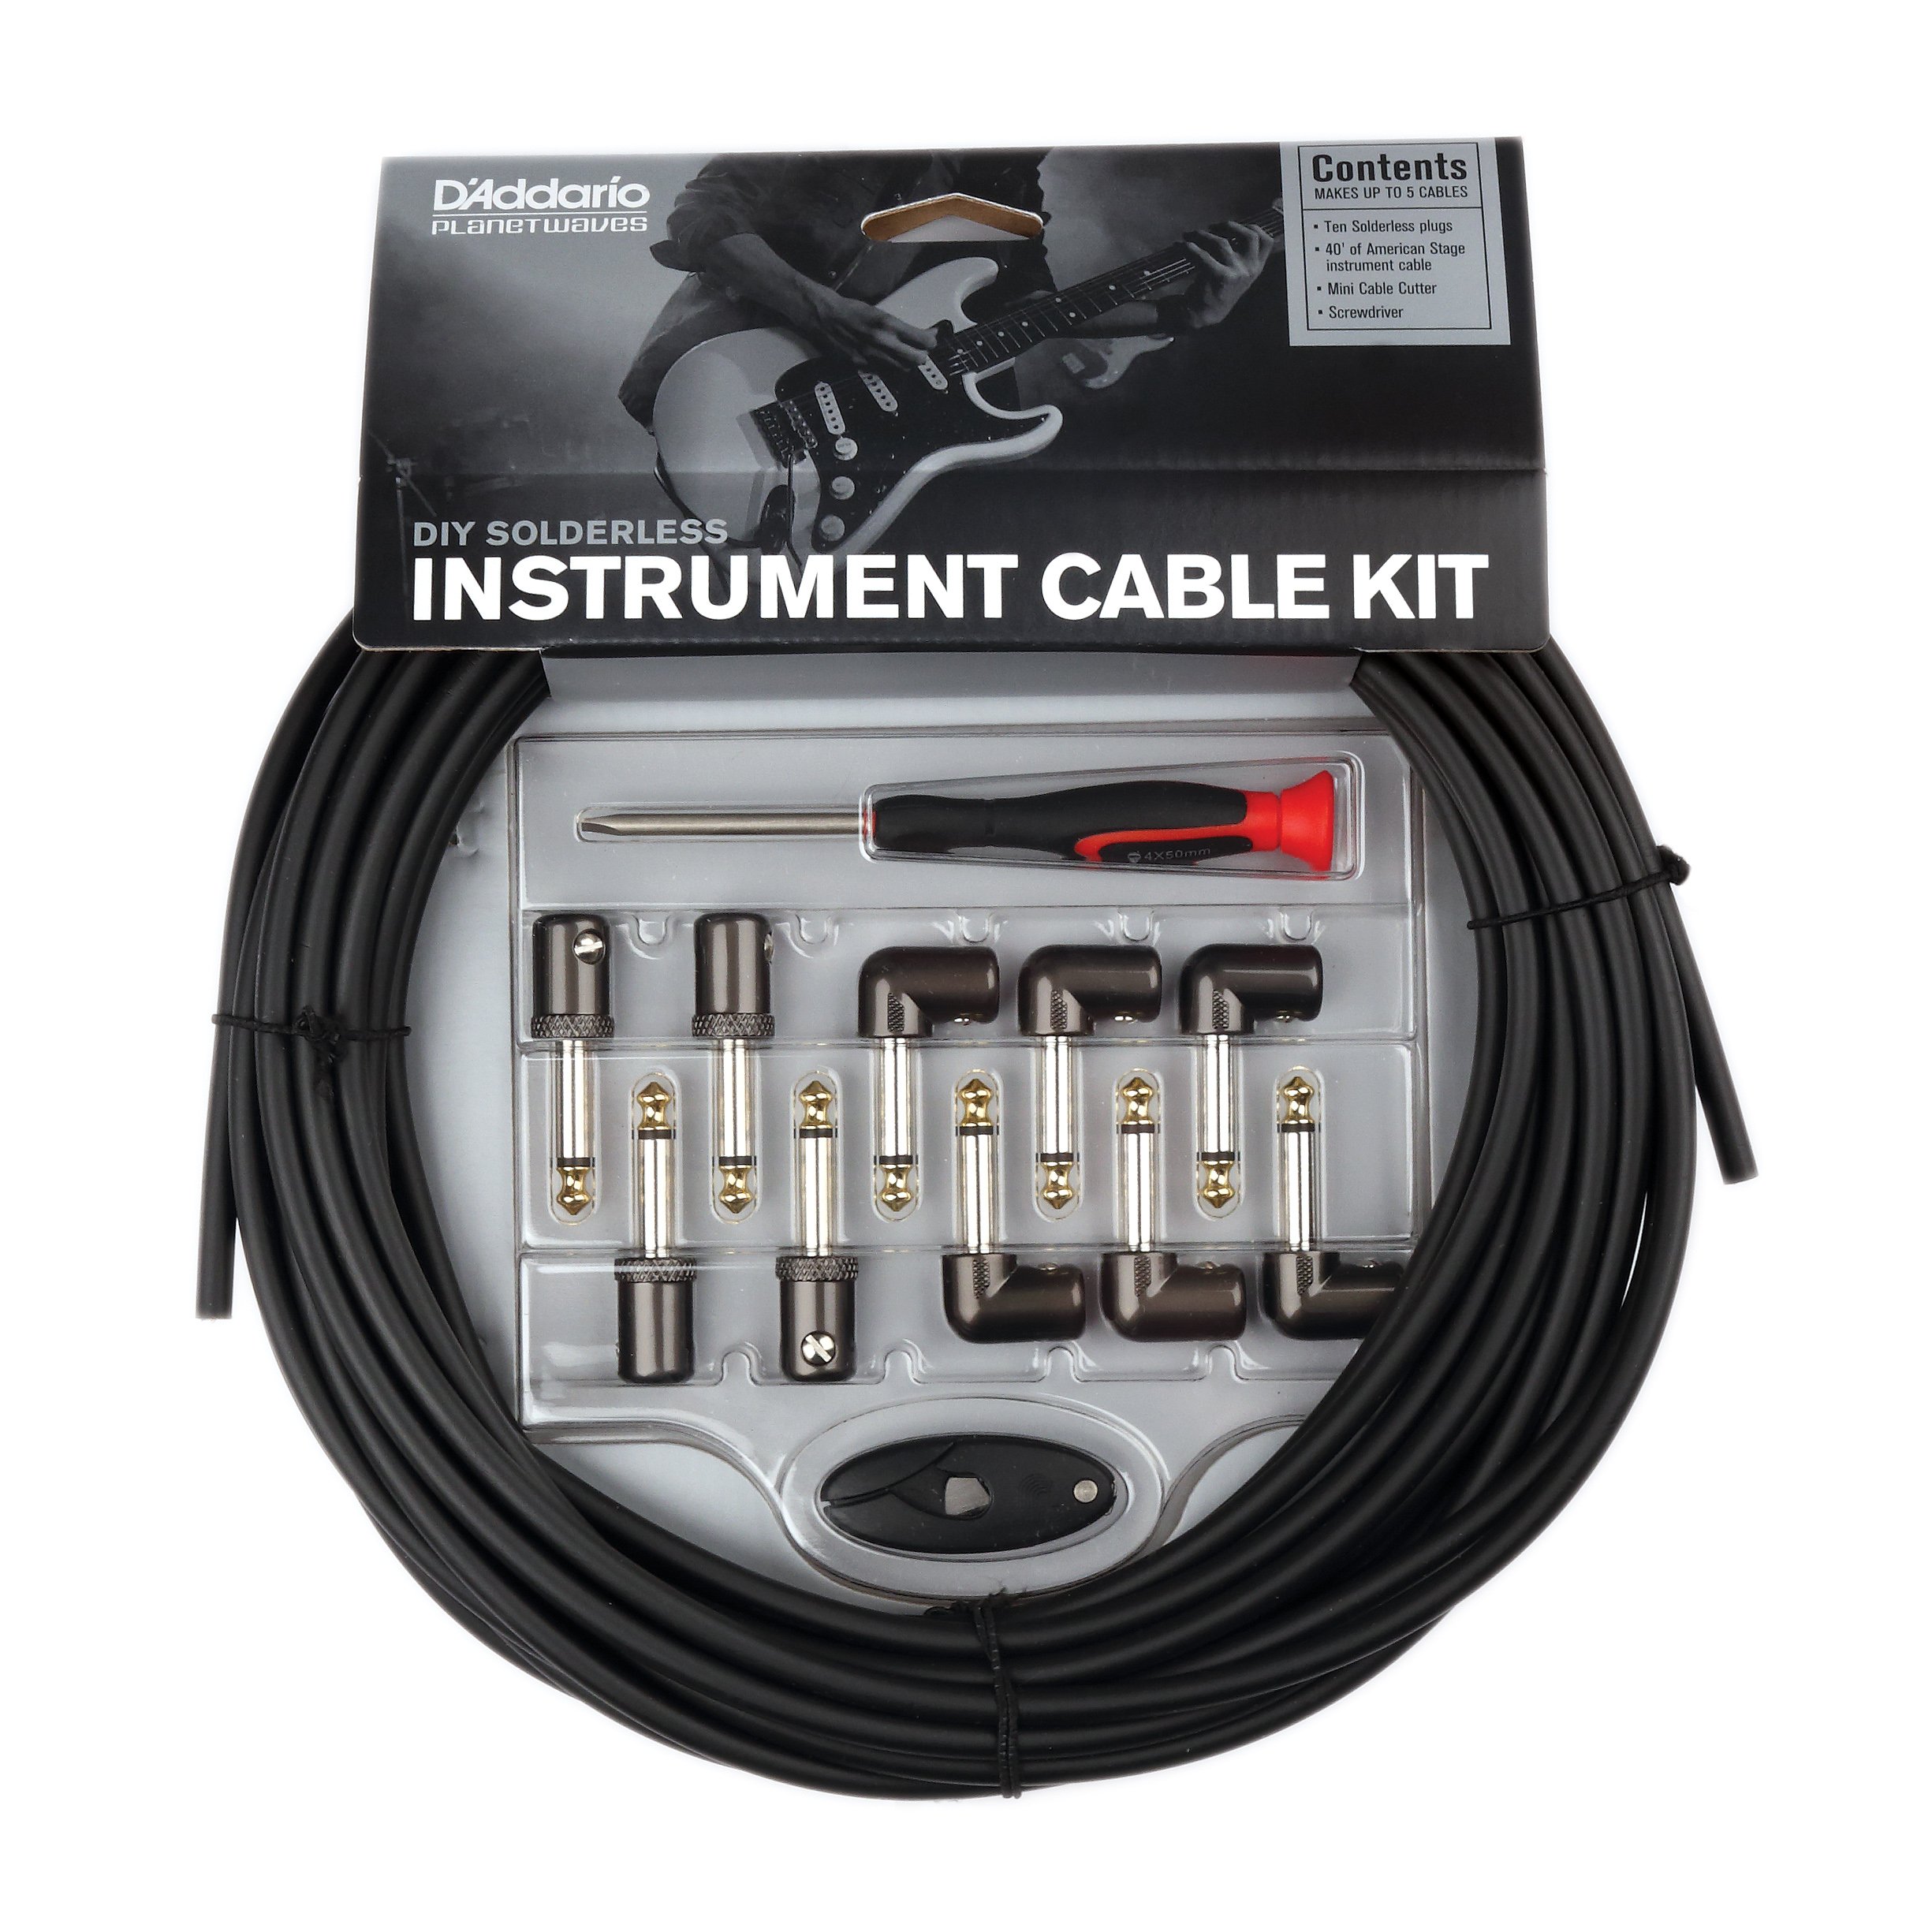 D'Addario Planet Waves DIY Solderless Instrument Cable Kit